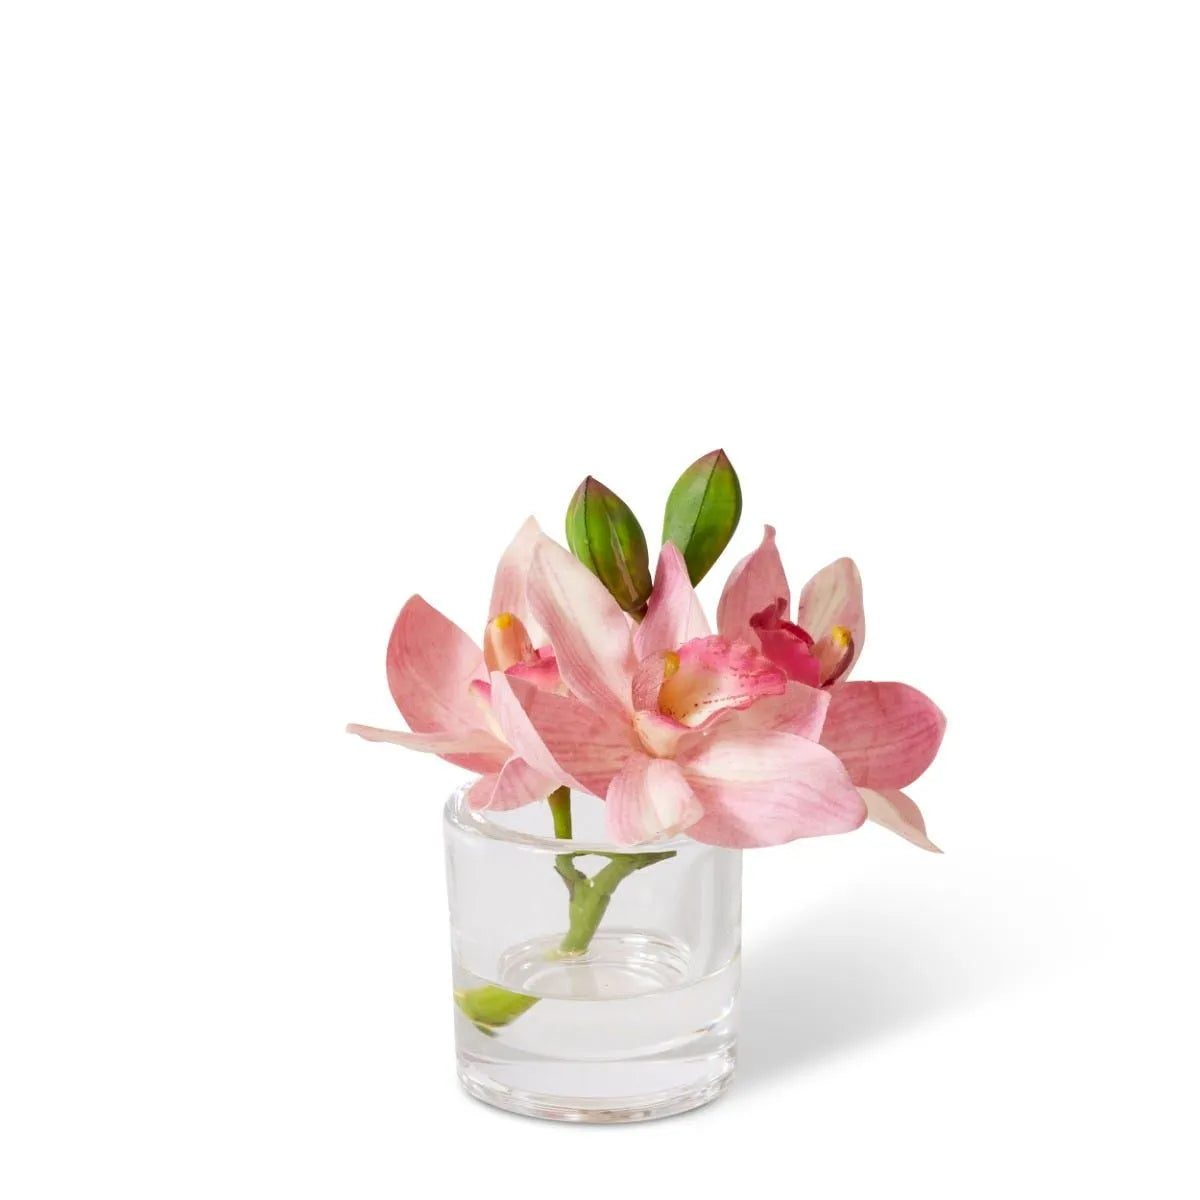 Experience elegance and exotic beauty with this pink Cymbidium Orchid in a vase. Its exotic look and stylish pot make it the perfect addition to any living space. Boost your interior decor with this gorgeous flower.